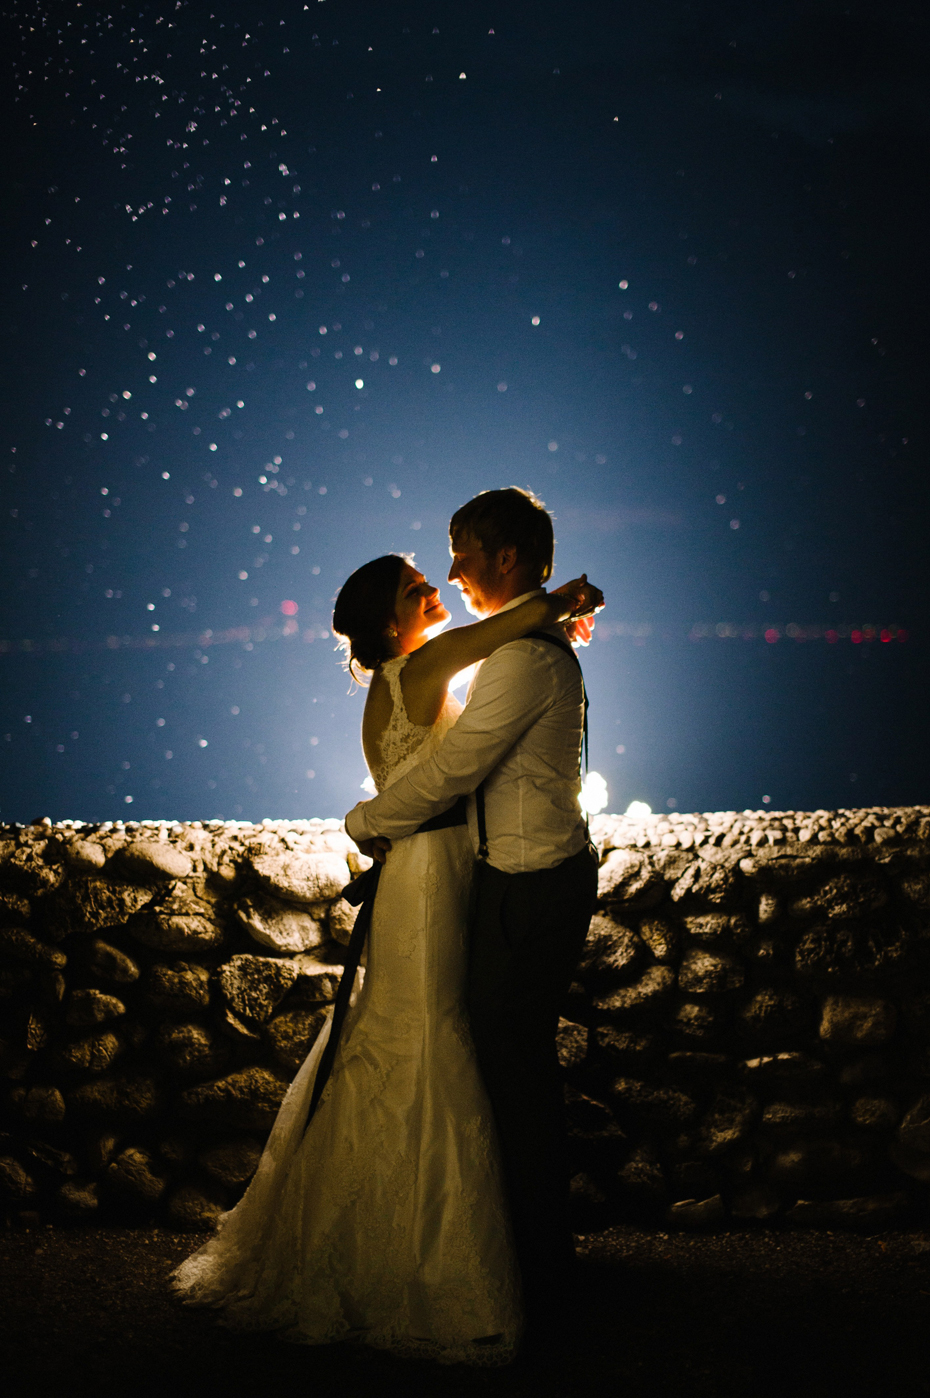 Bride and groom pose at night with the lights of the Mackinac bridge in the background during an outdoor wedding reception at The Inn at Stonecliffe on Mackinac Island by Ann Arbor Wedding Photographer Heather Jowett.